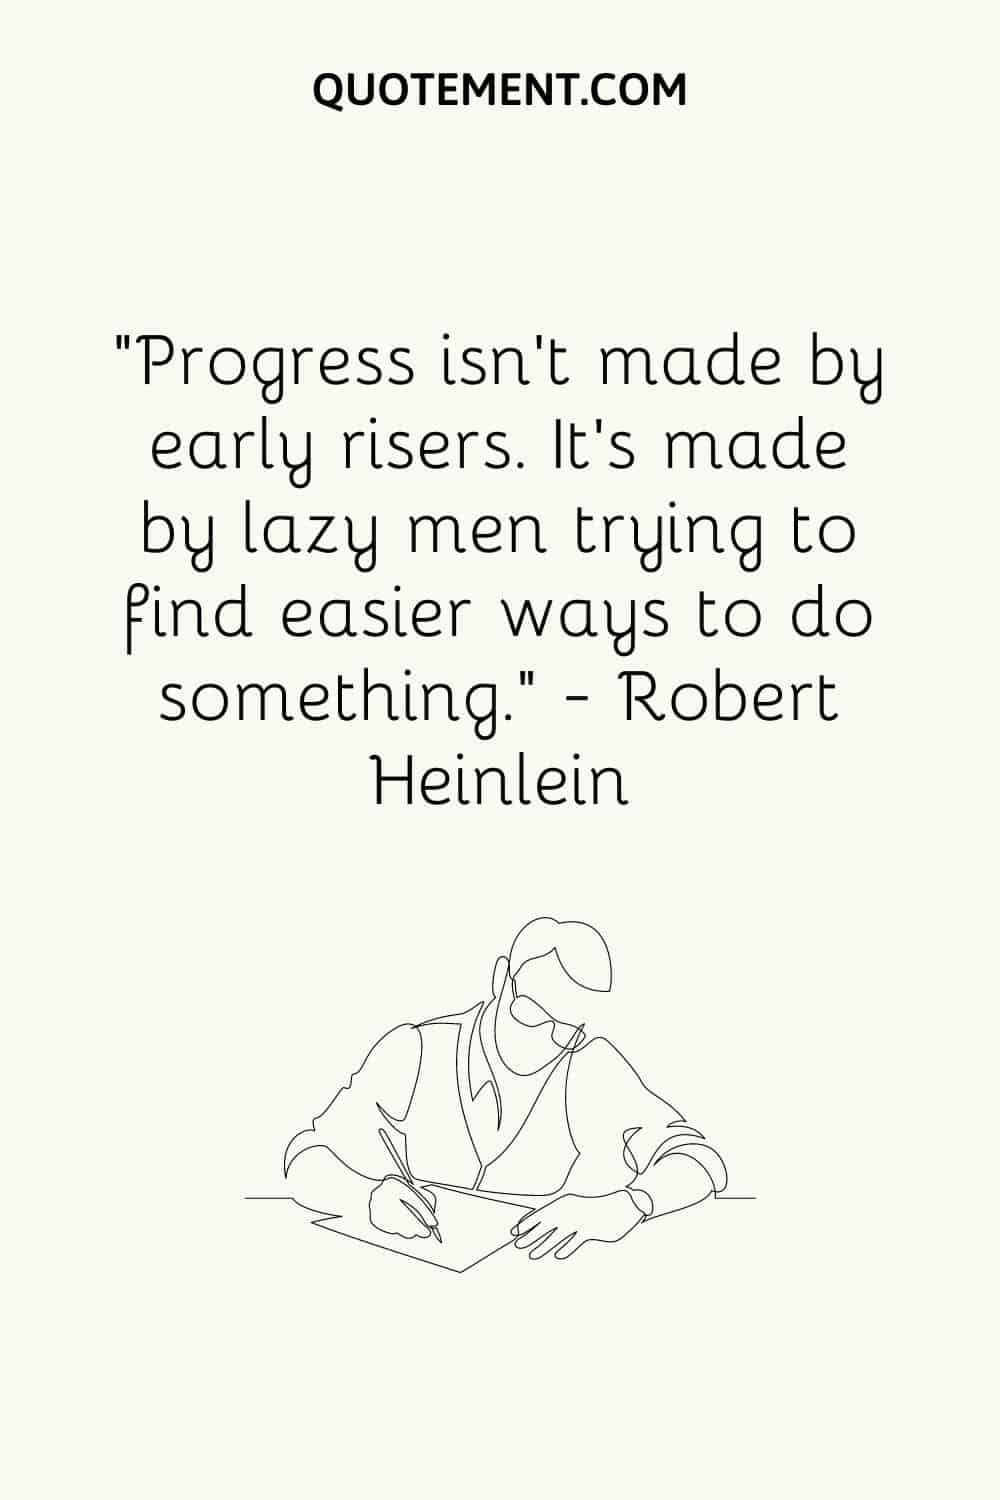 Progress isn’t made by early risers